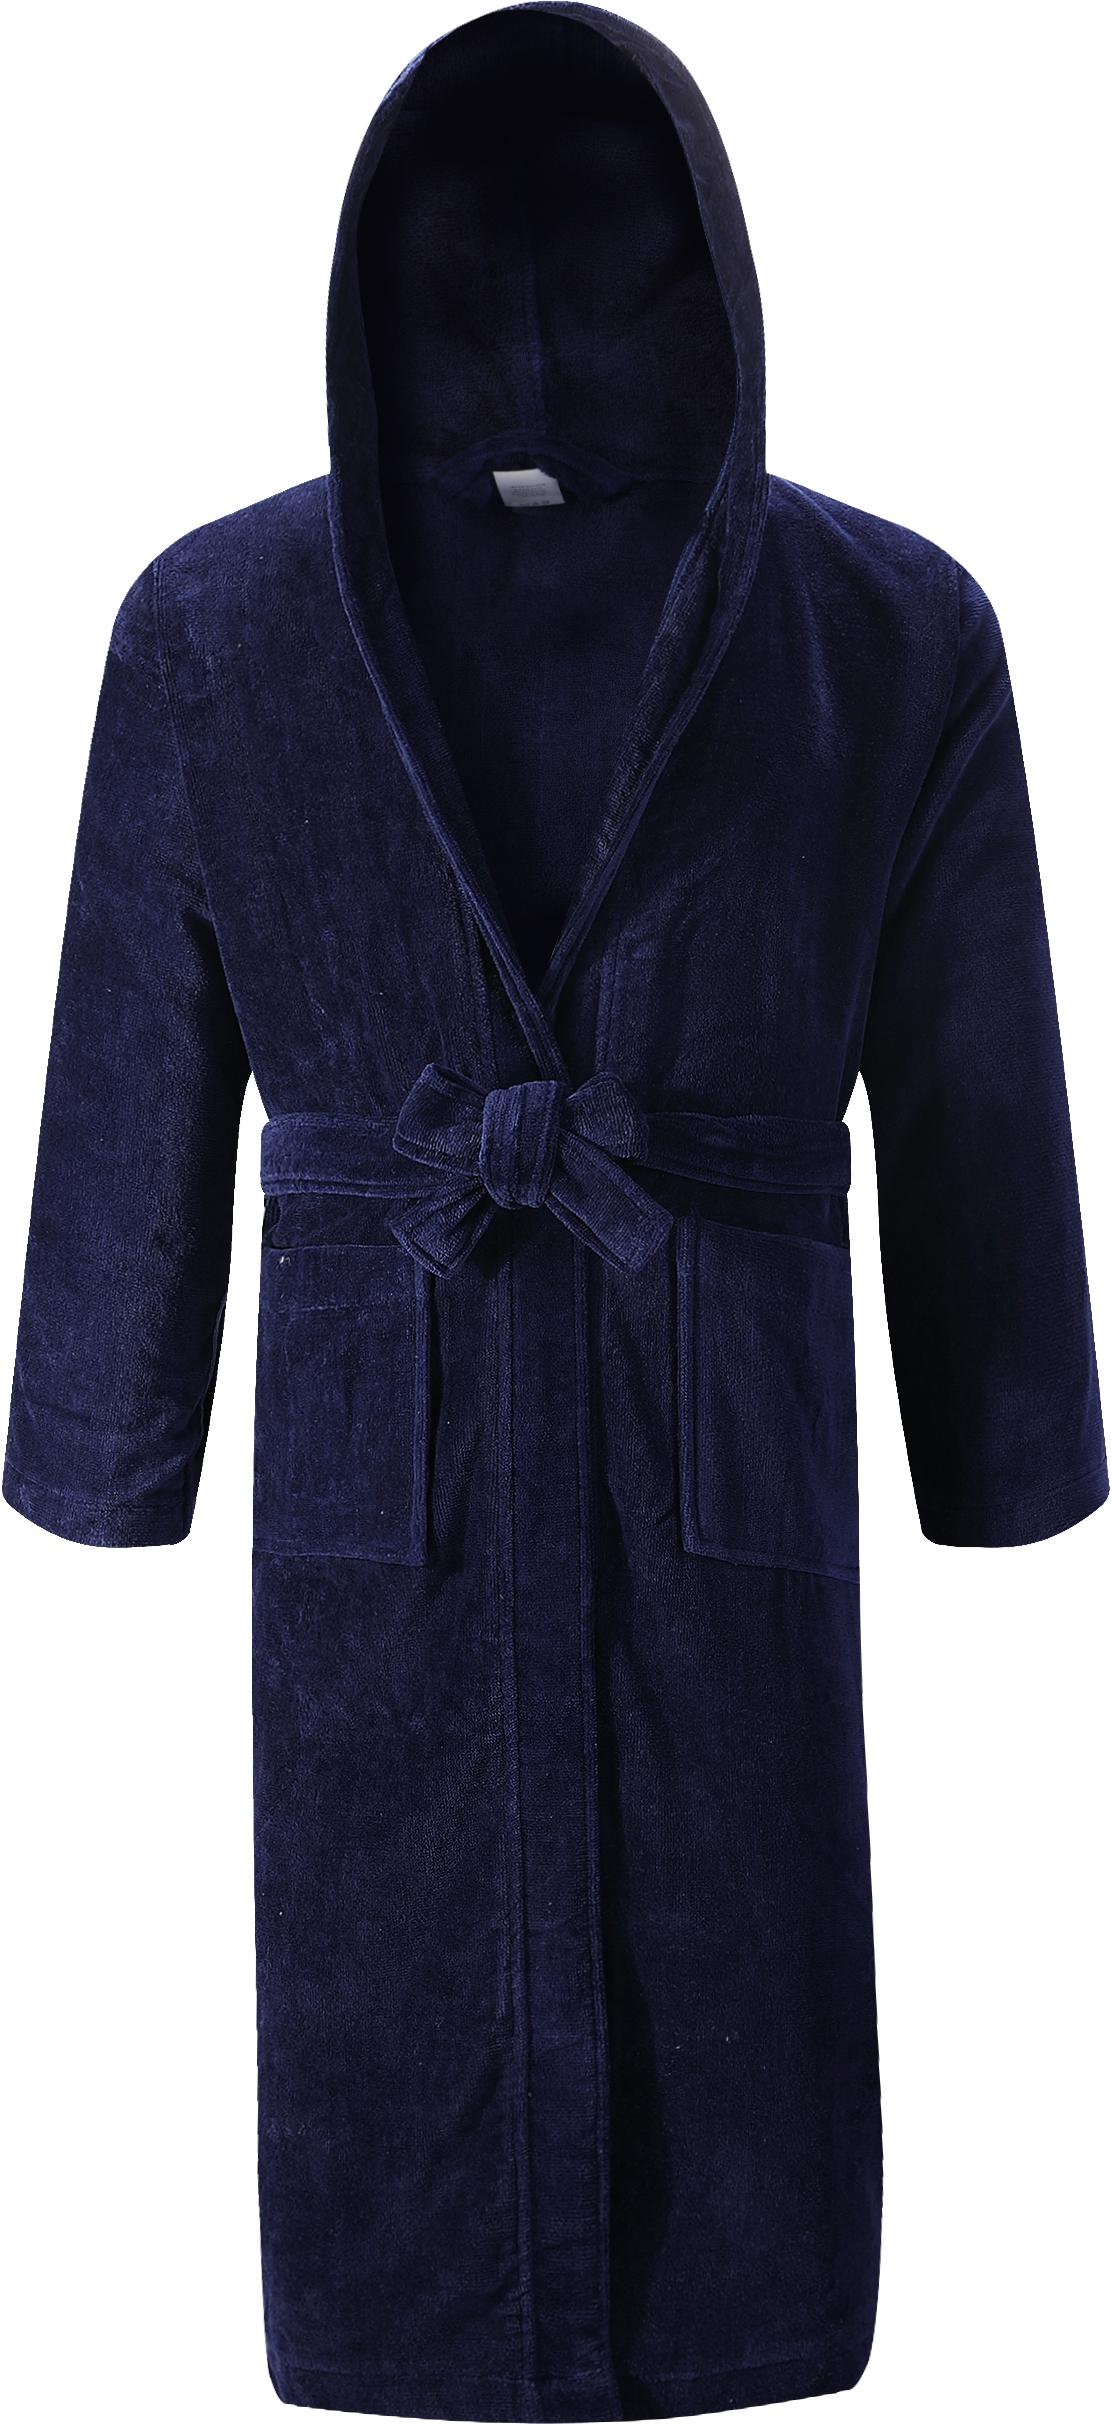 Abstract Boys Navy Terry Robe with Hood - 120-NVY